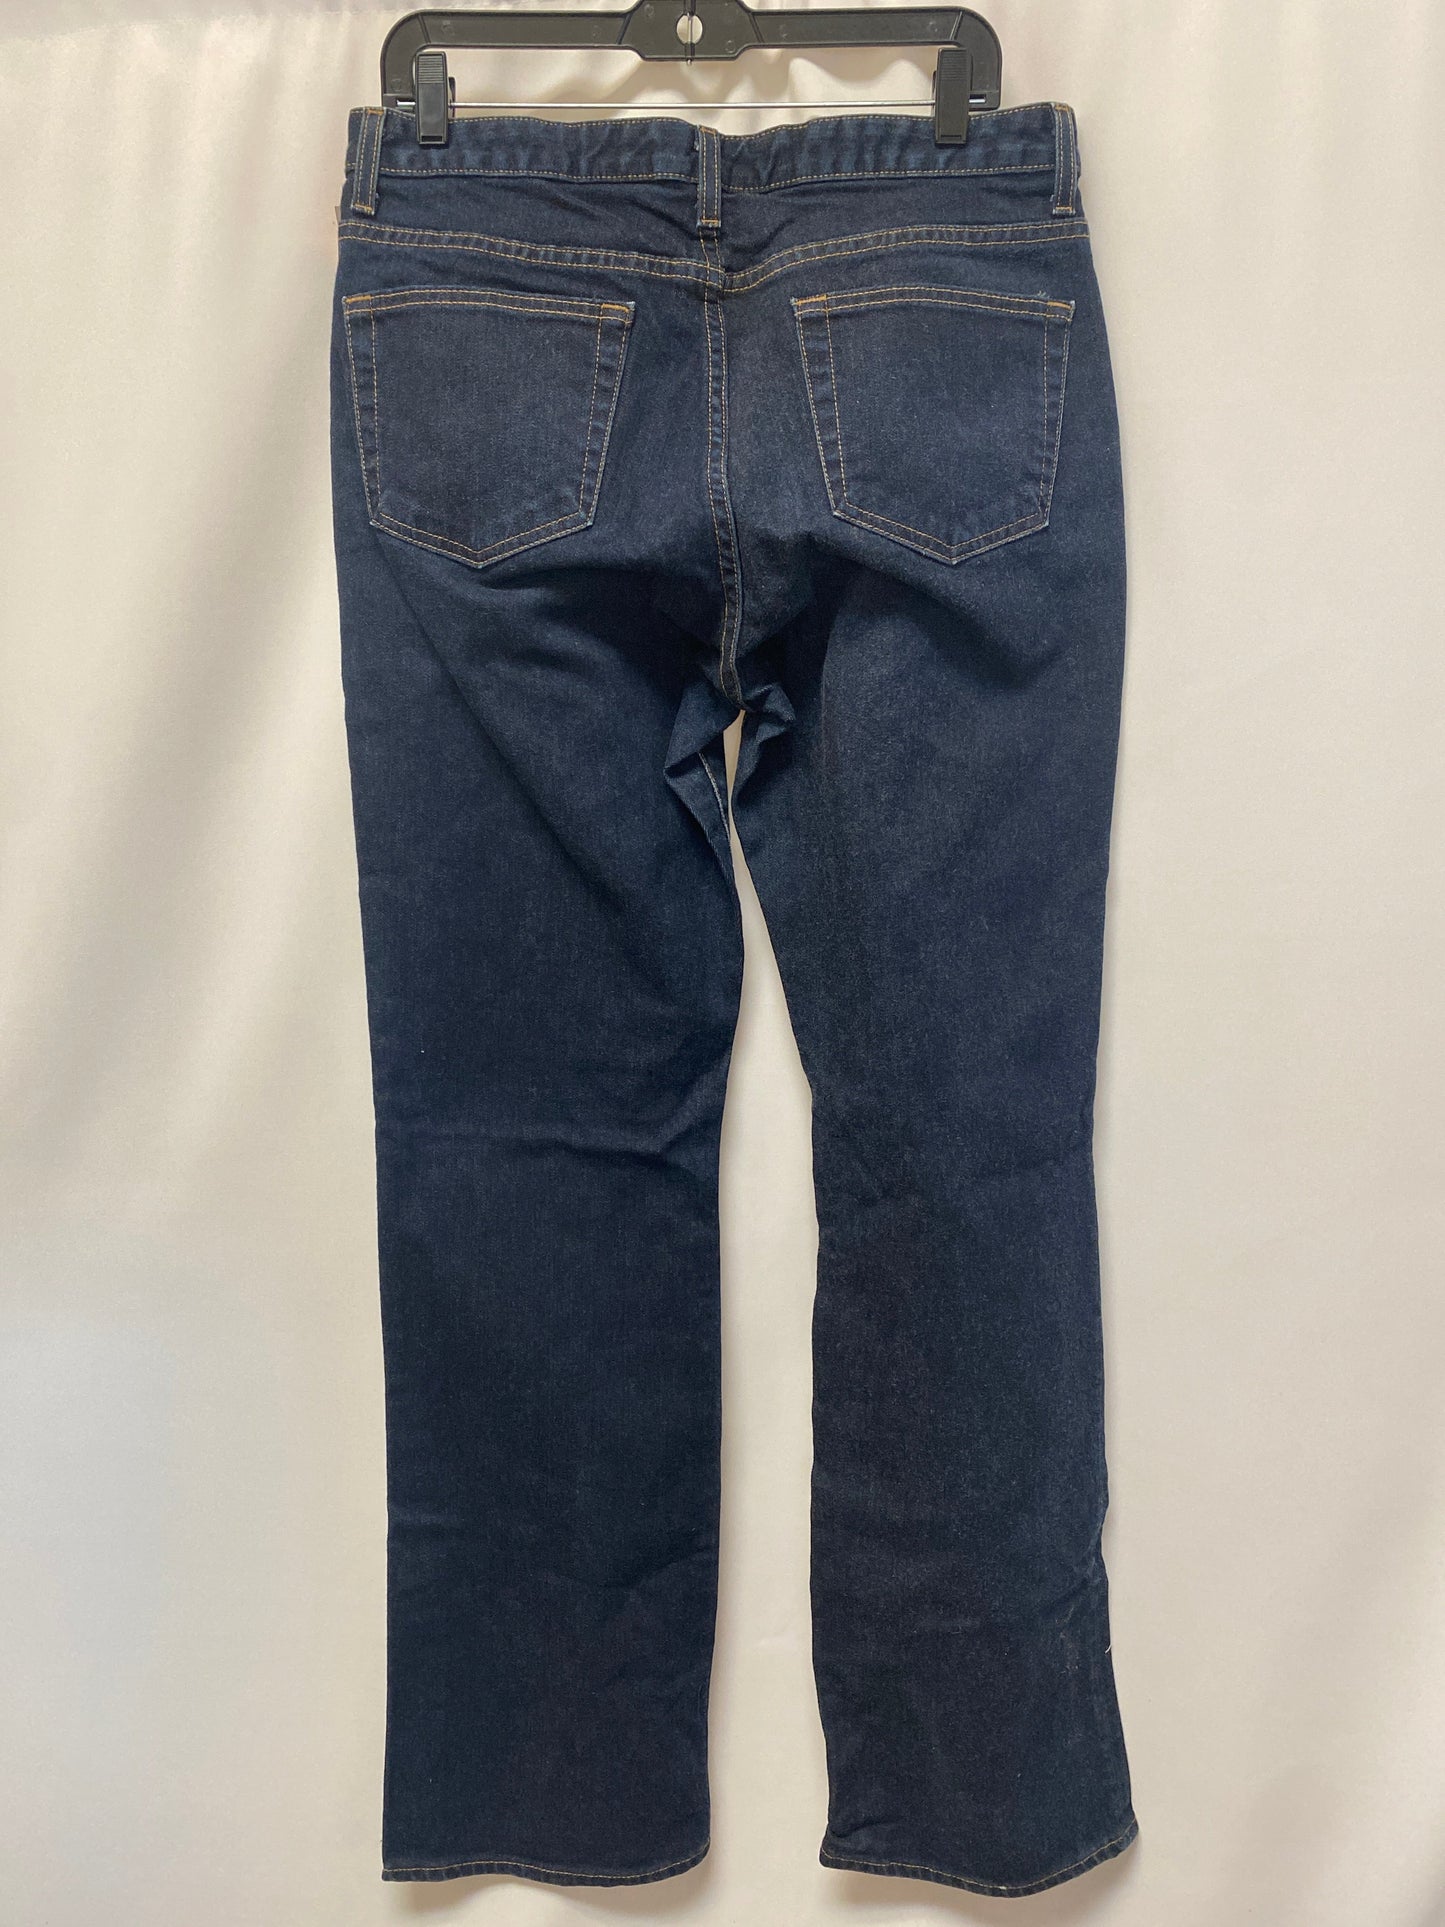 Jeans Boot Cut By Gap  Size: 14tall